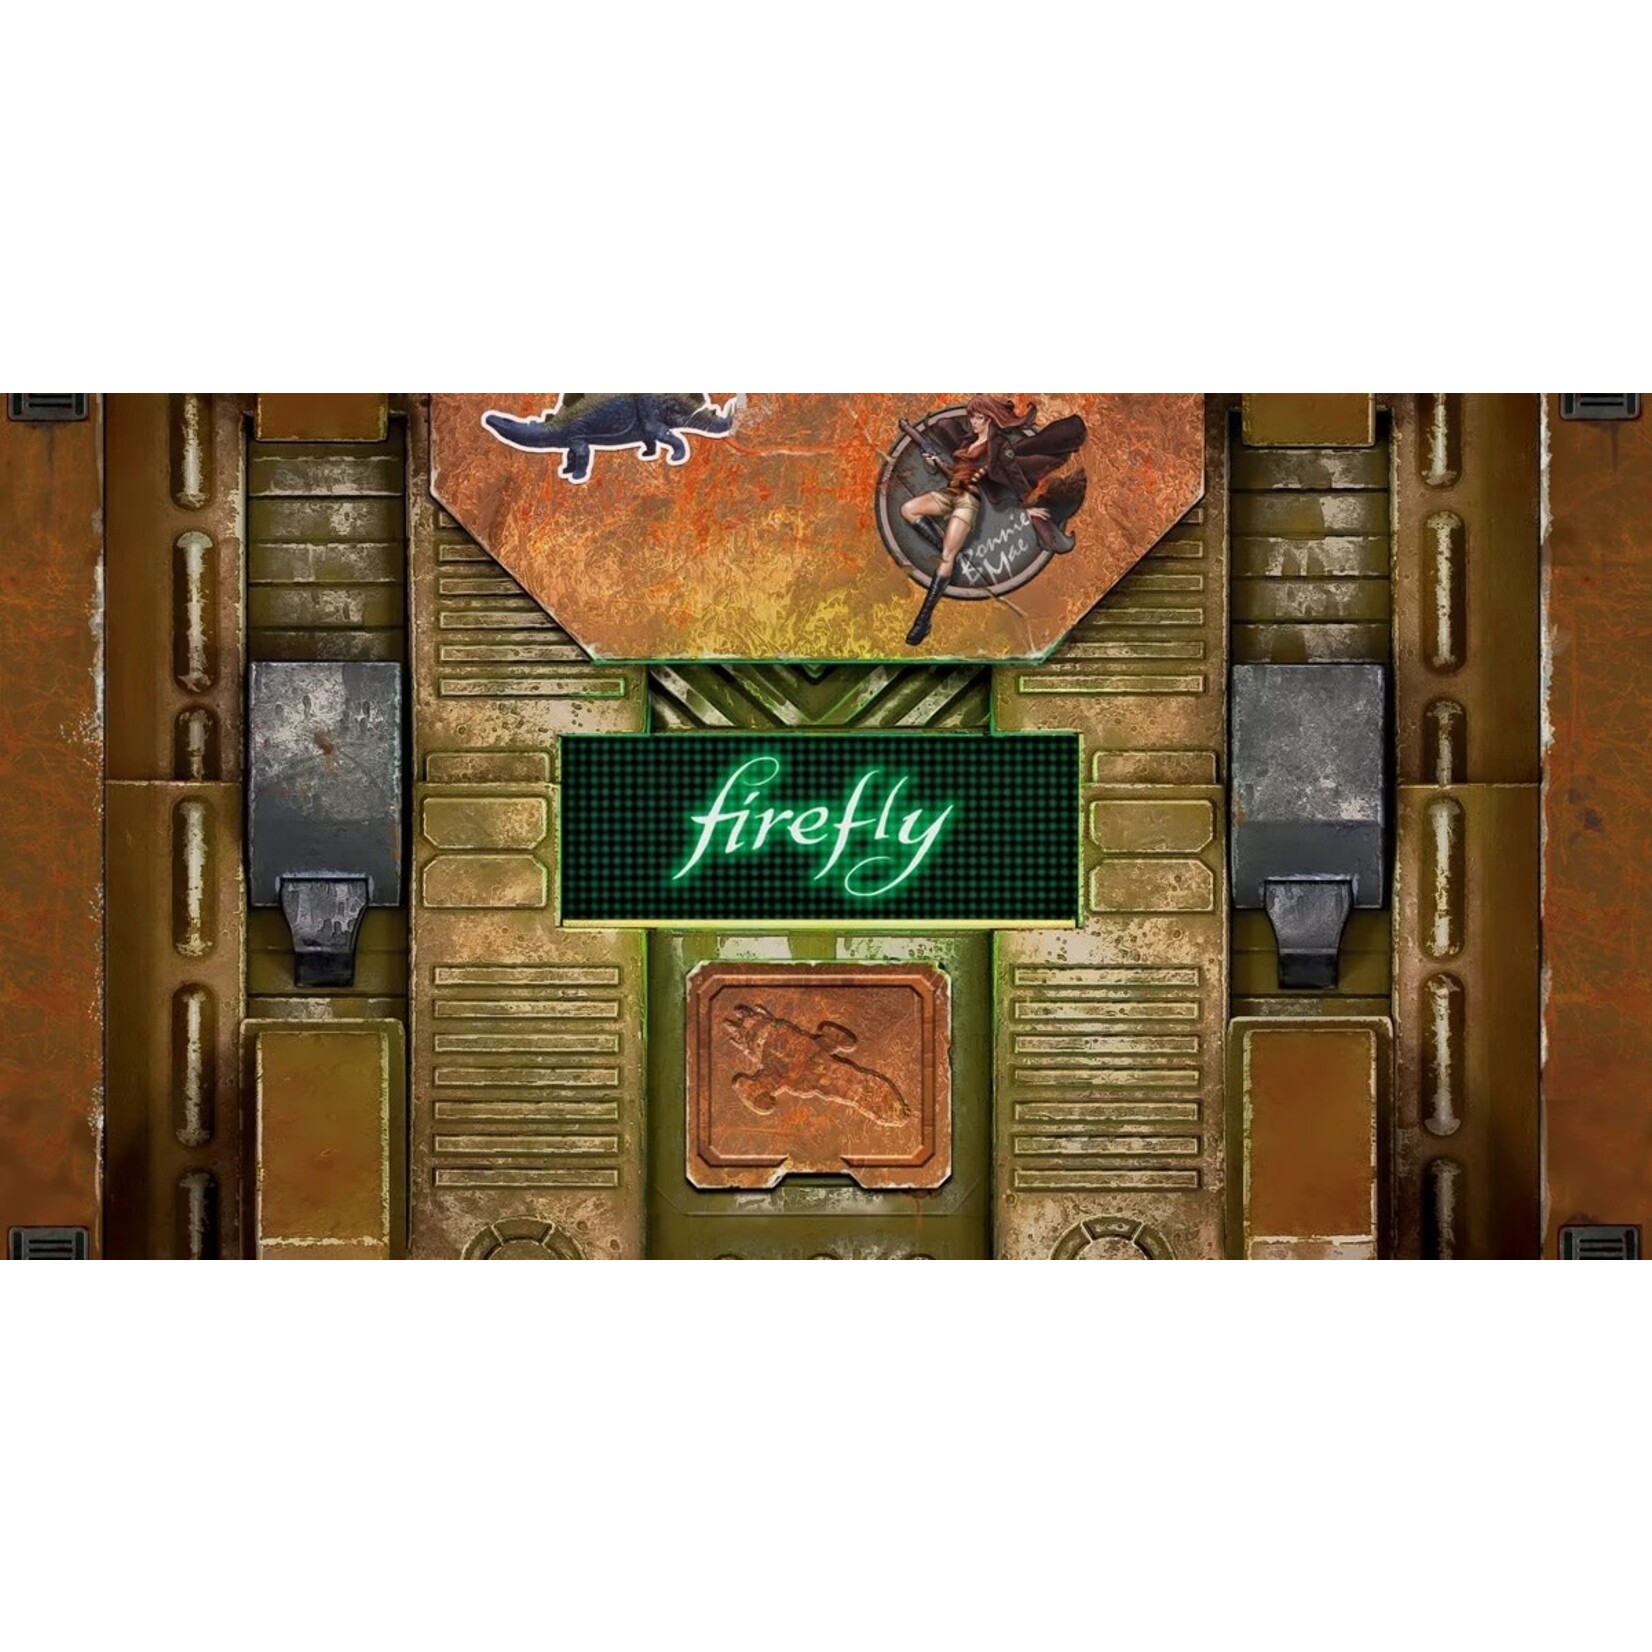 GaleForce Nine Firefly The Game 10th Anniversary Collector's Edition